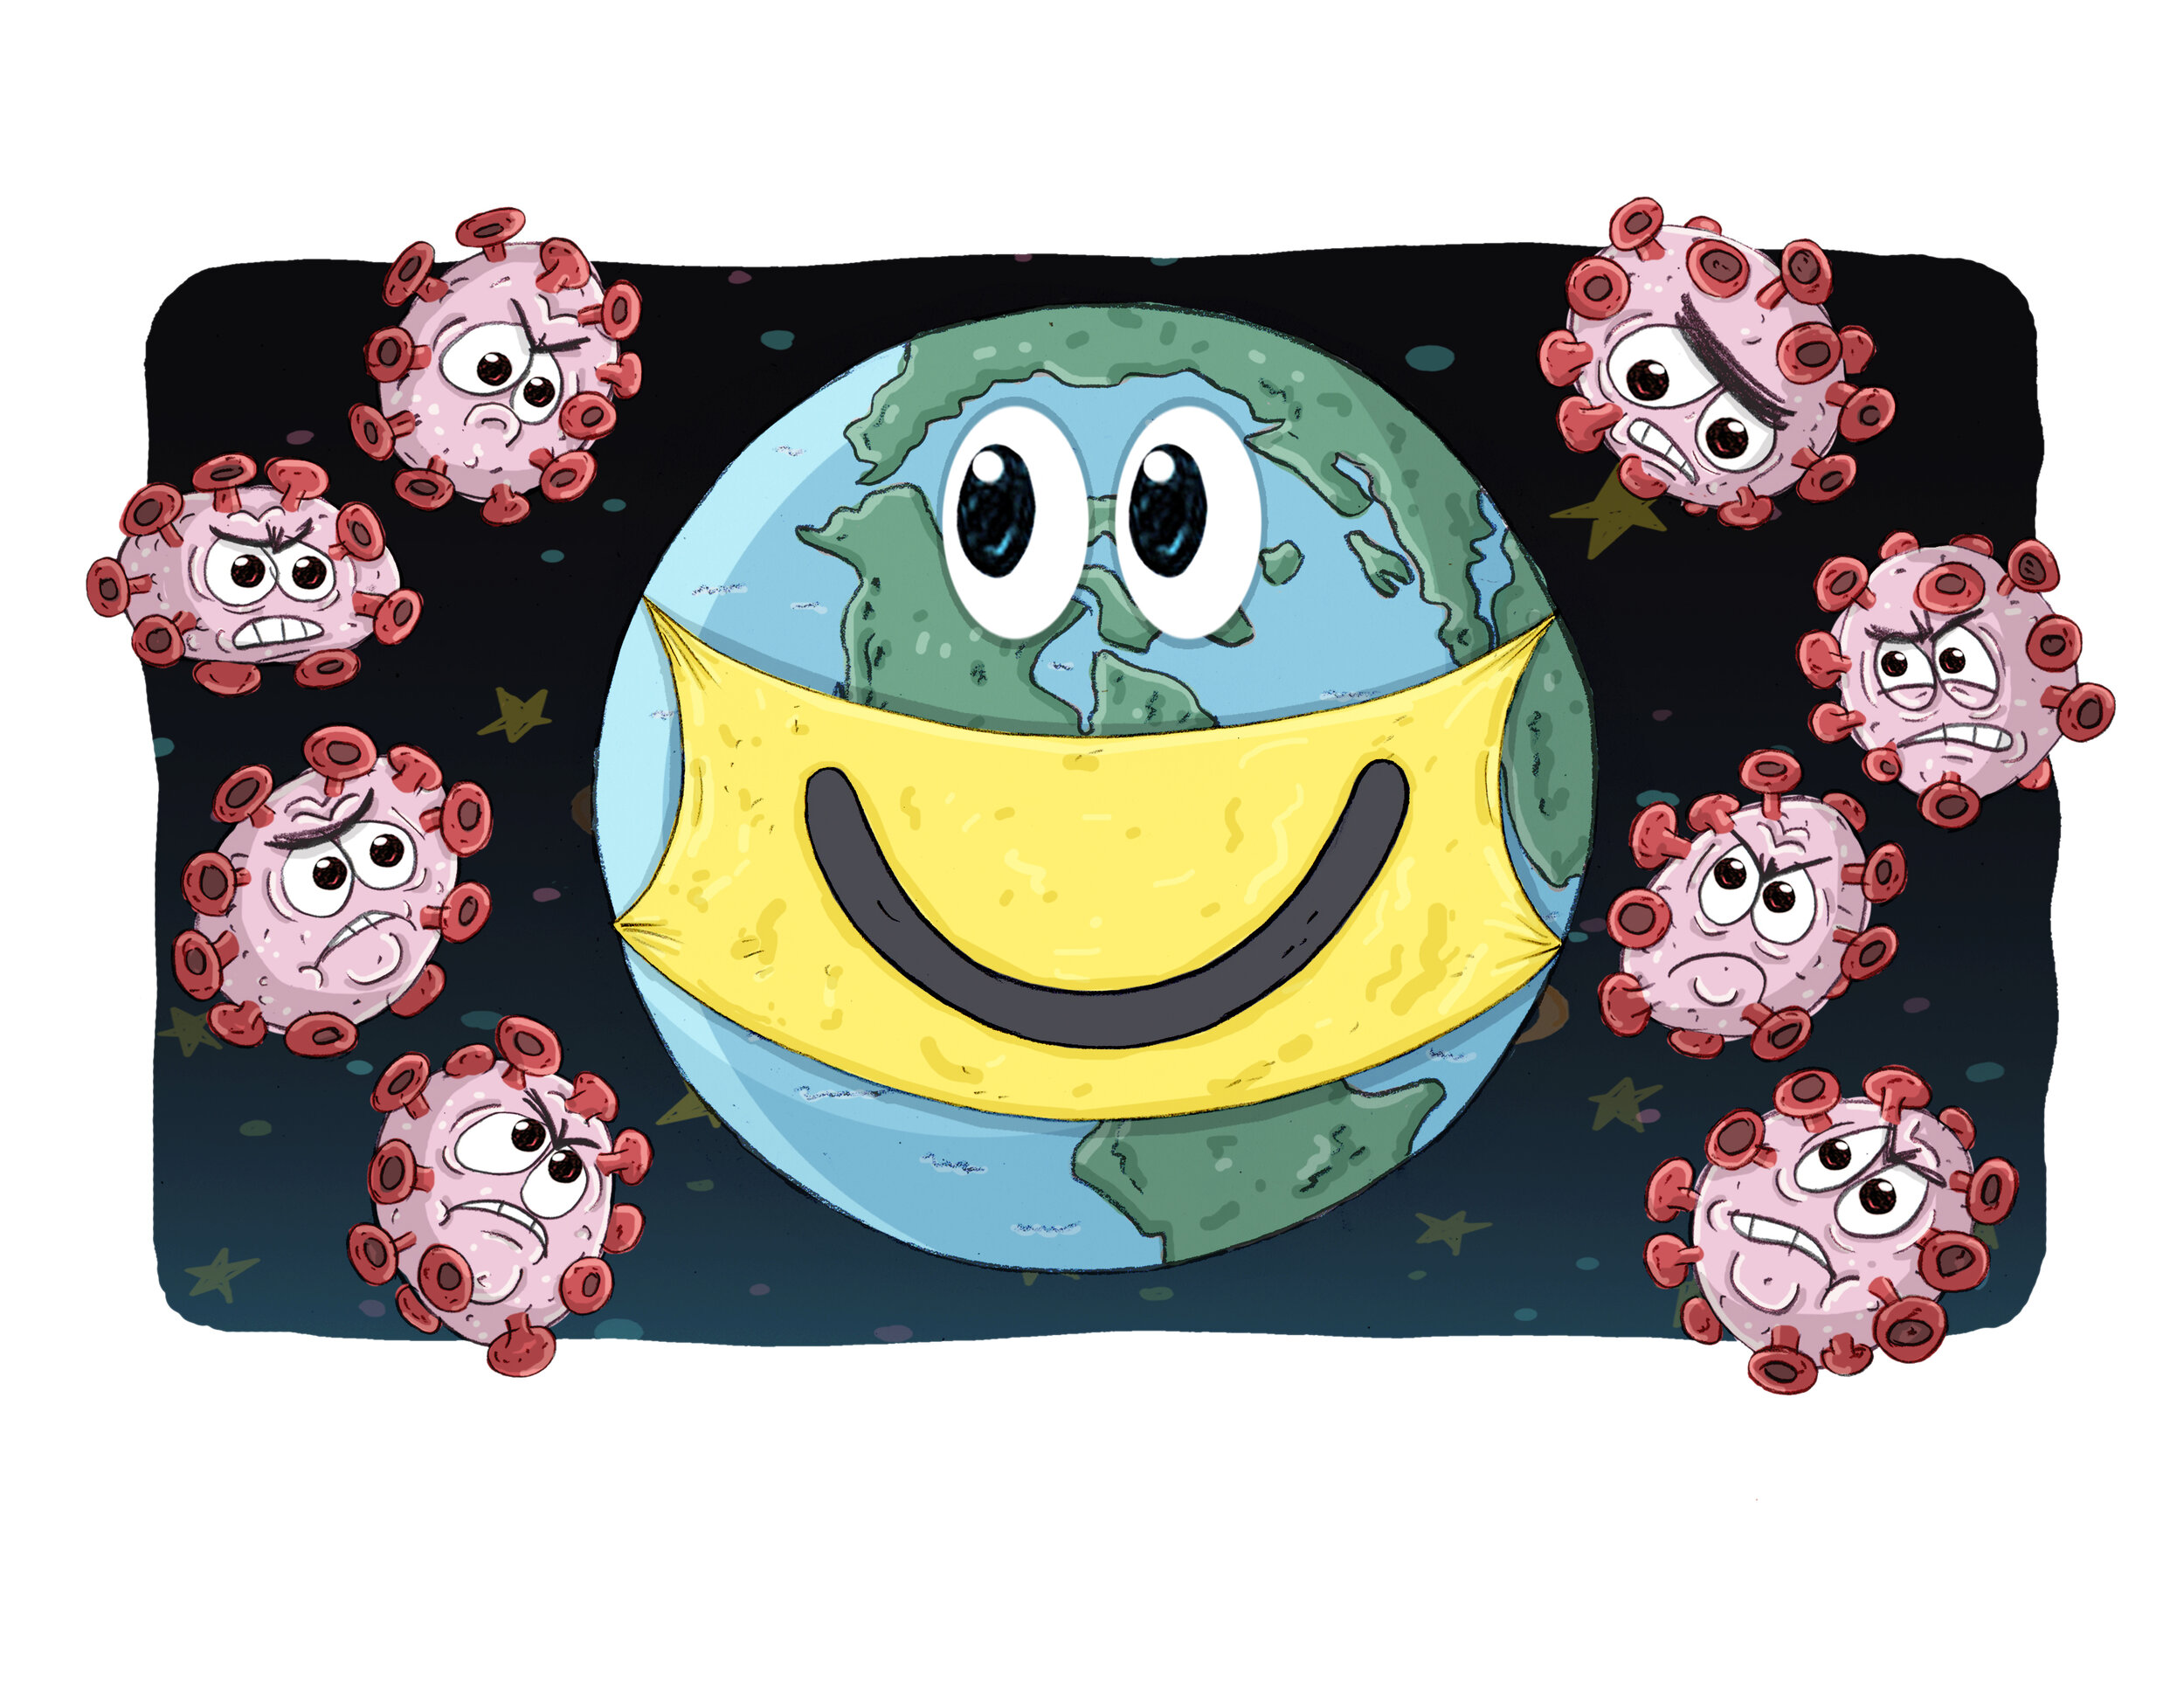 Covid-19 virus tries attacking the earth but the earth wisely wears a face mask